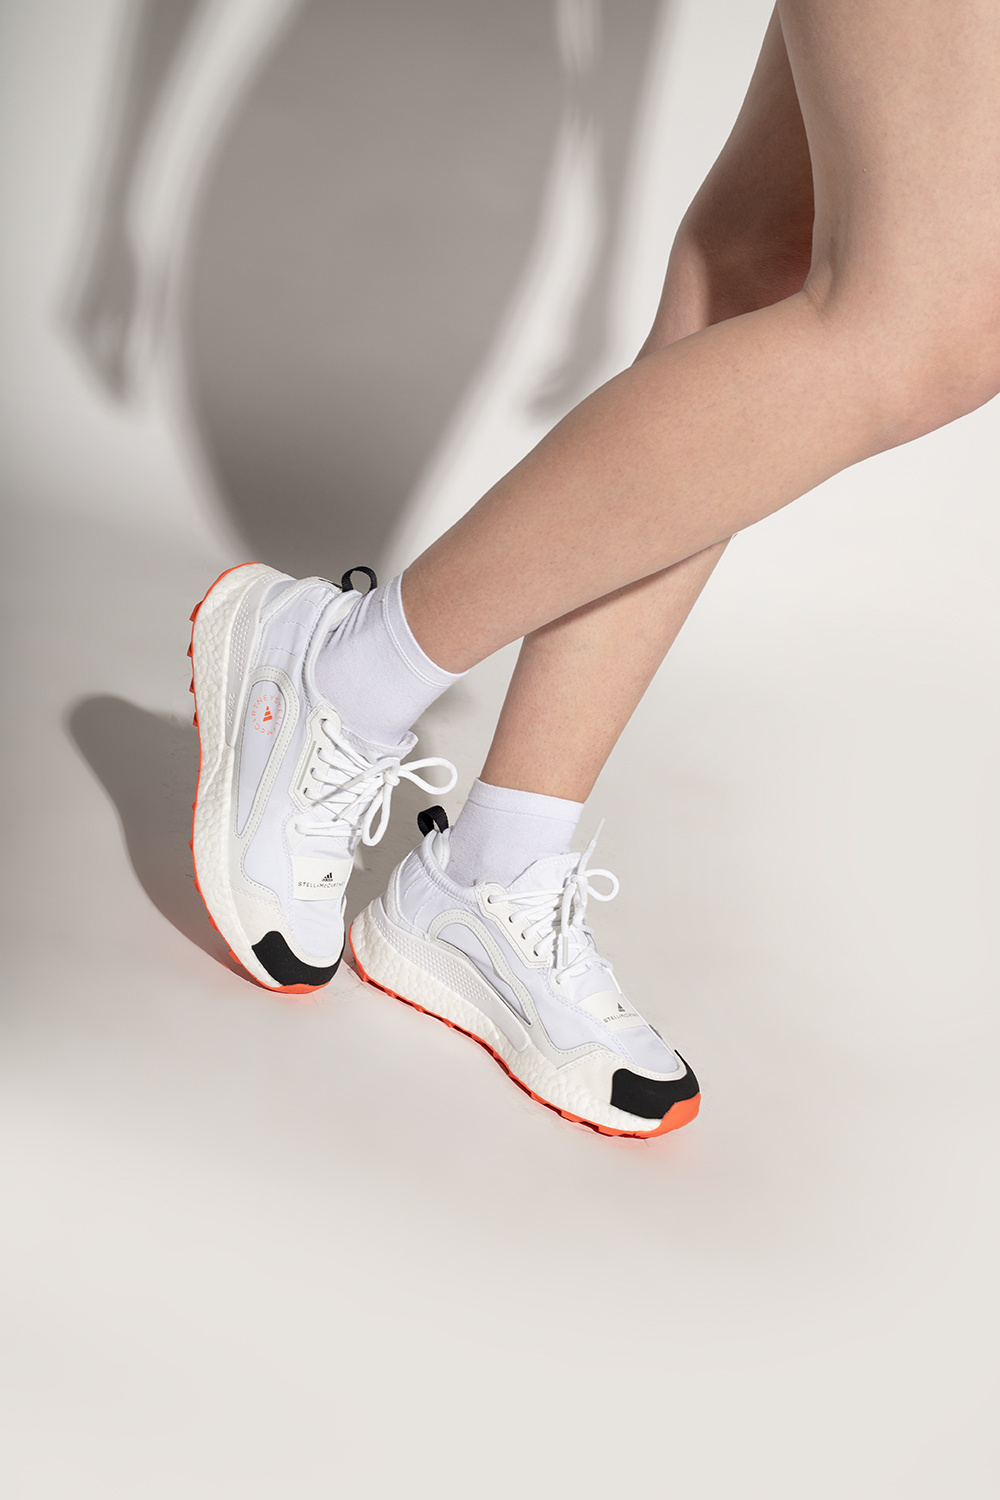 ADIDAS by Stella McCartney ‘Outdoor Boost 2.0 Light’ running shoes